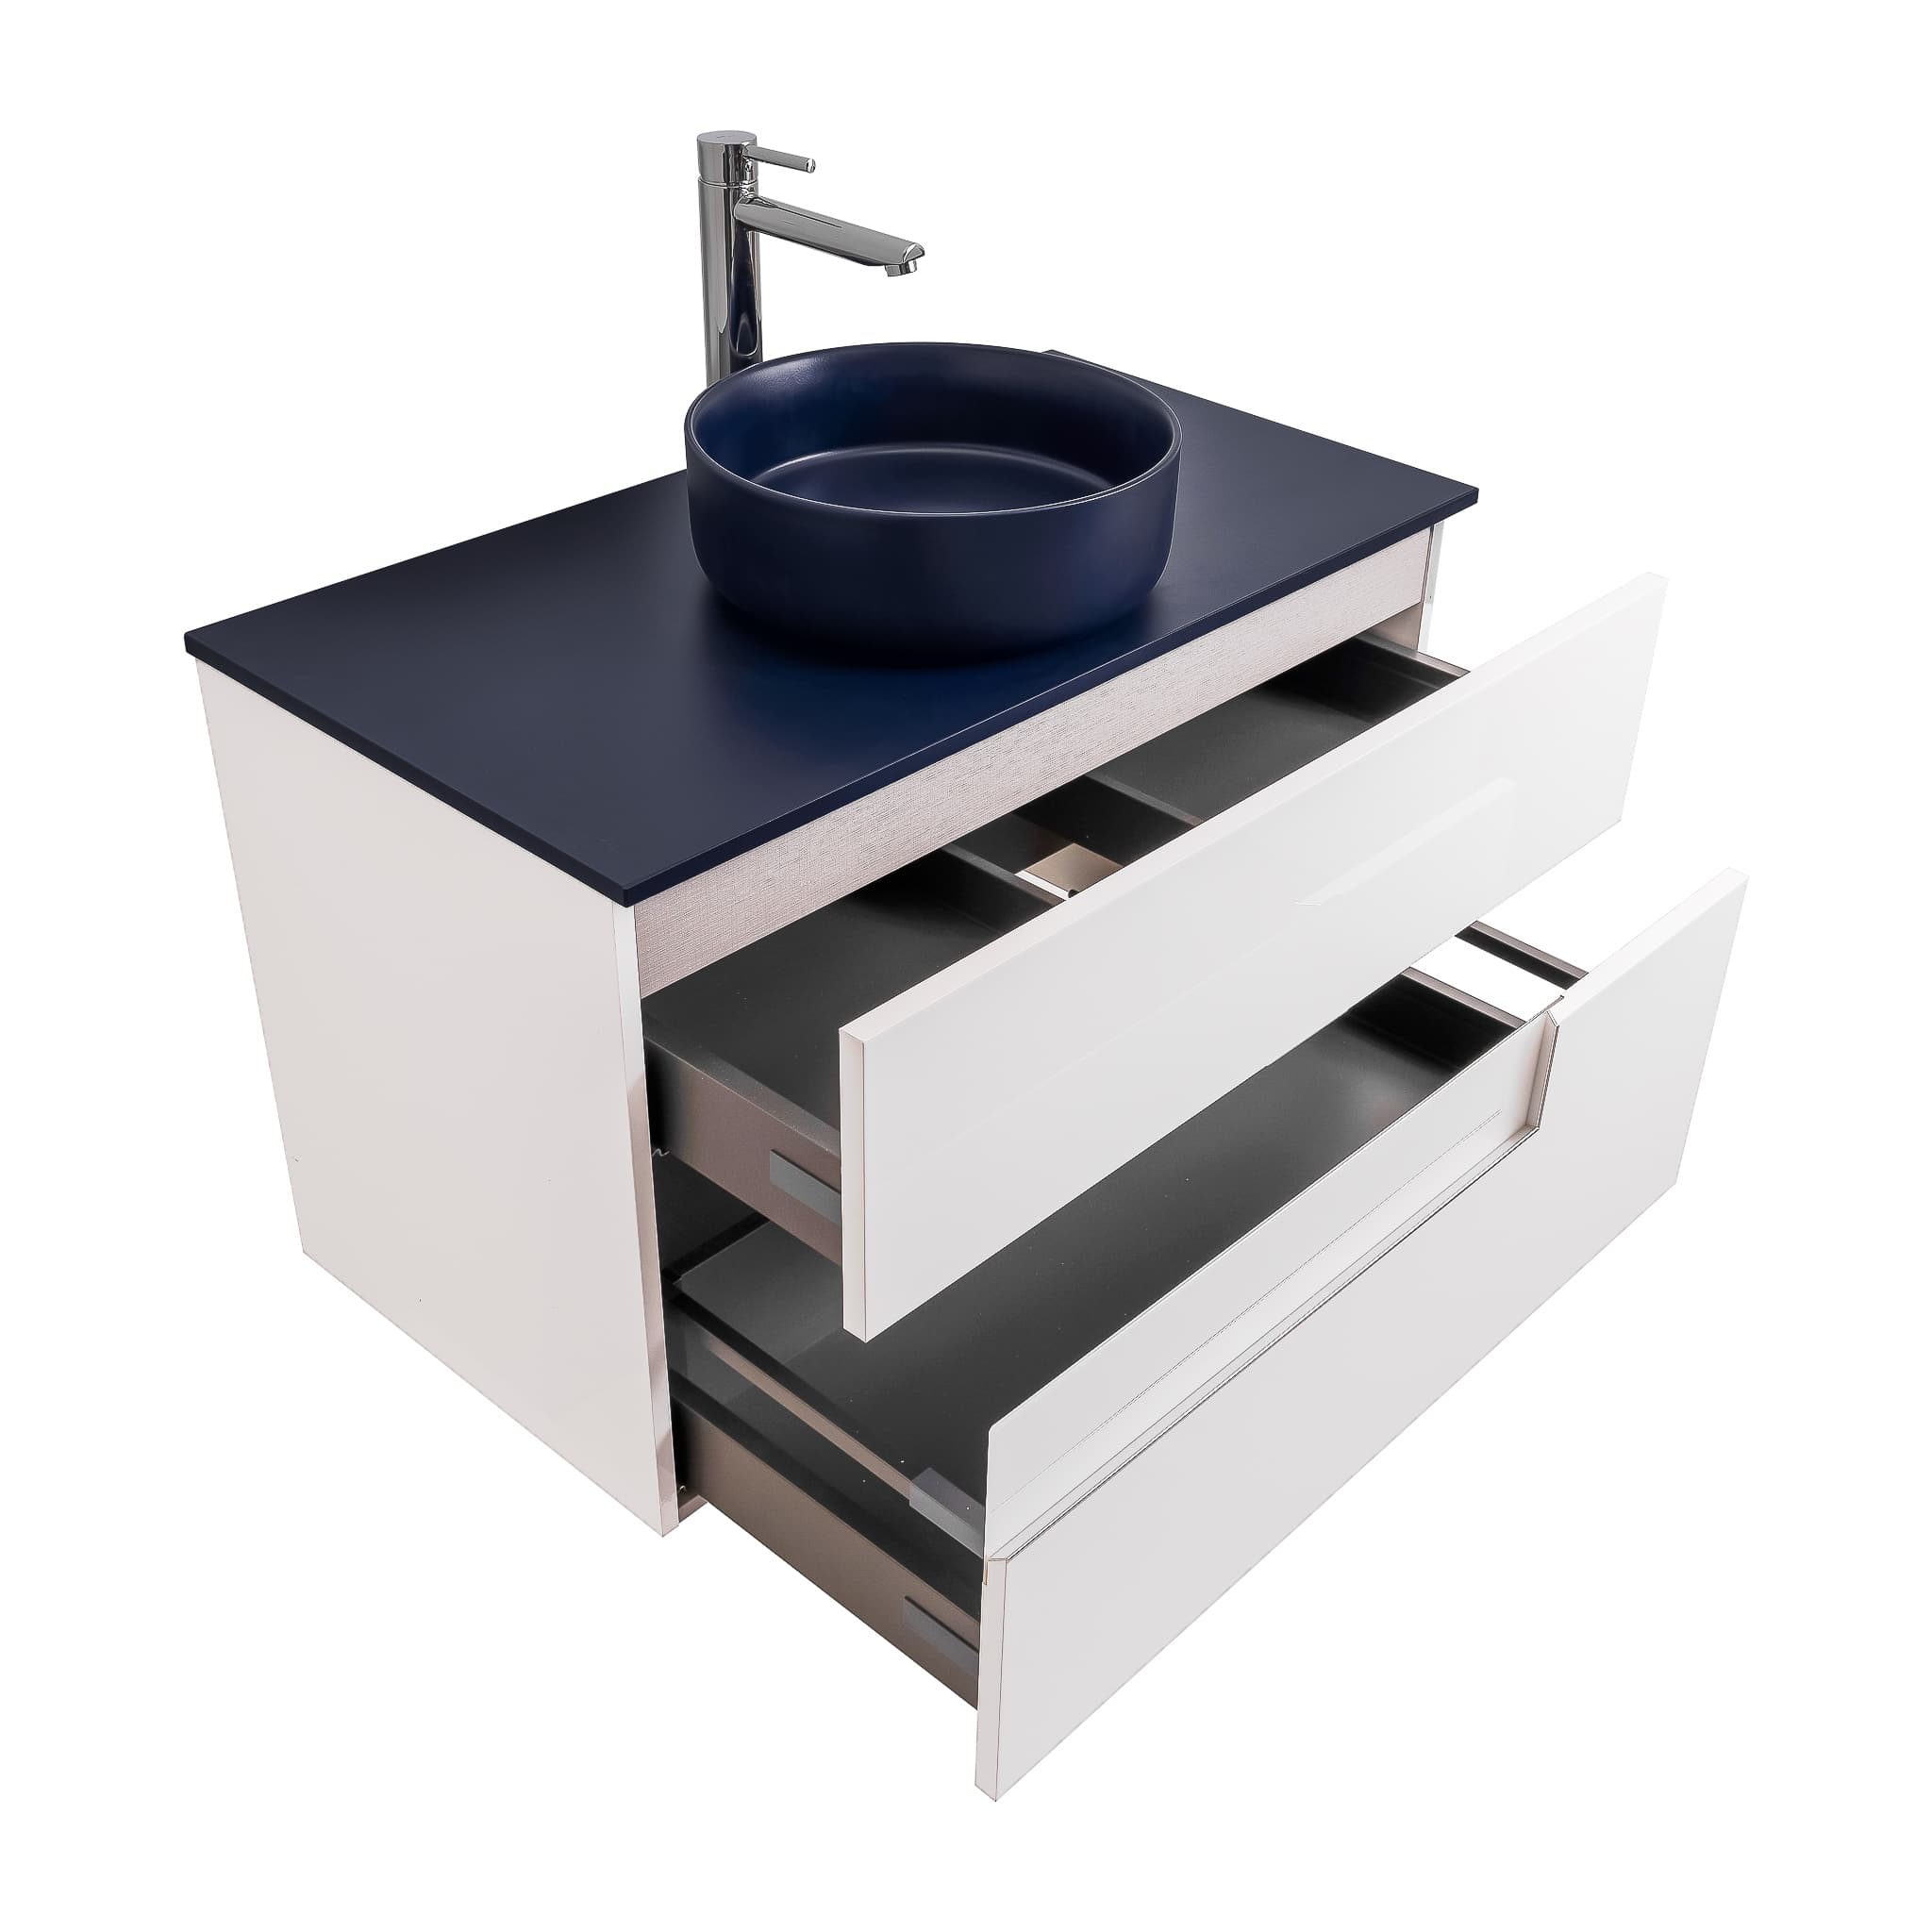 Vision 31.5 White High Gloss Cabinet, Ares Navy Blue Top And Ares Navy Blue Ceramic Basin, Wall Mounted Modern Vanity Set